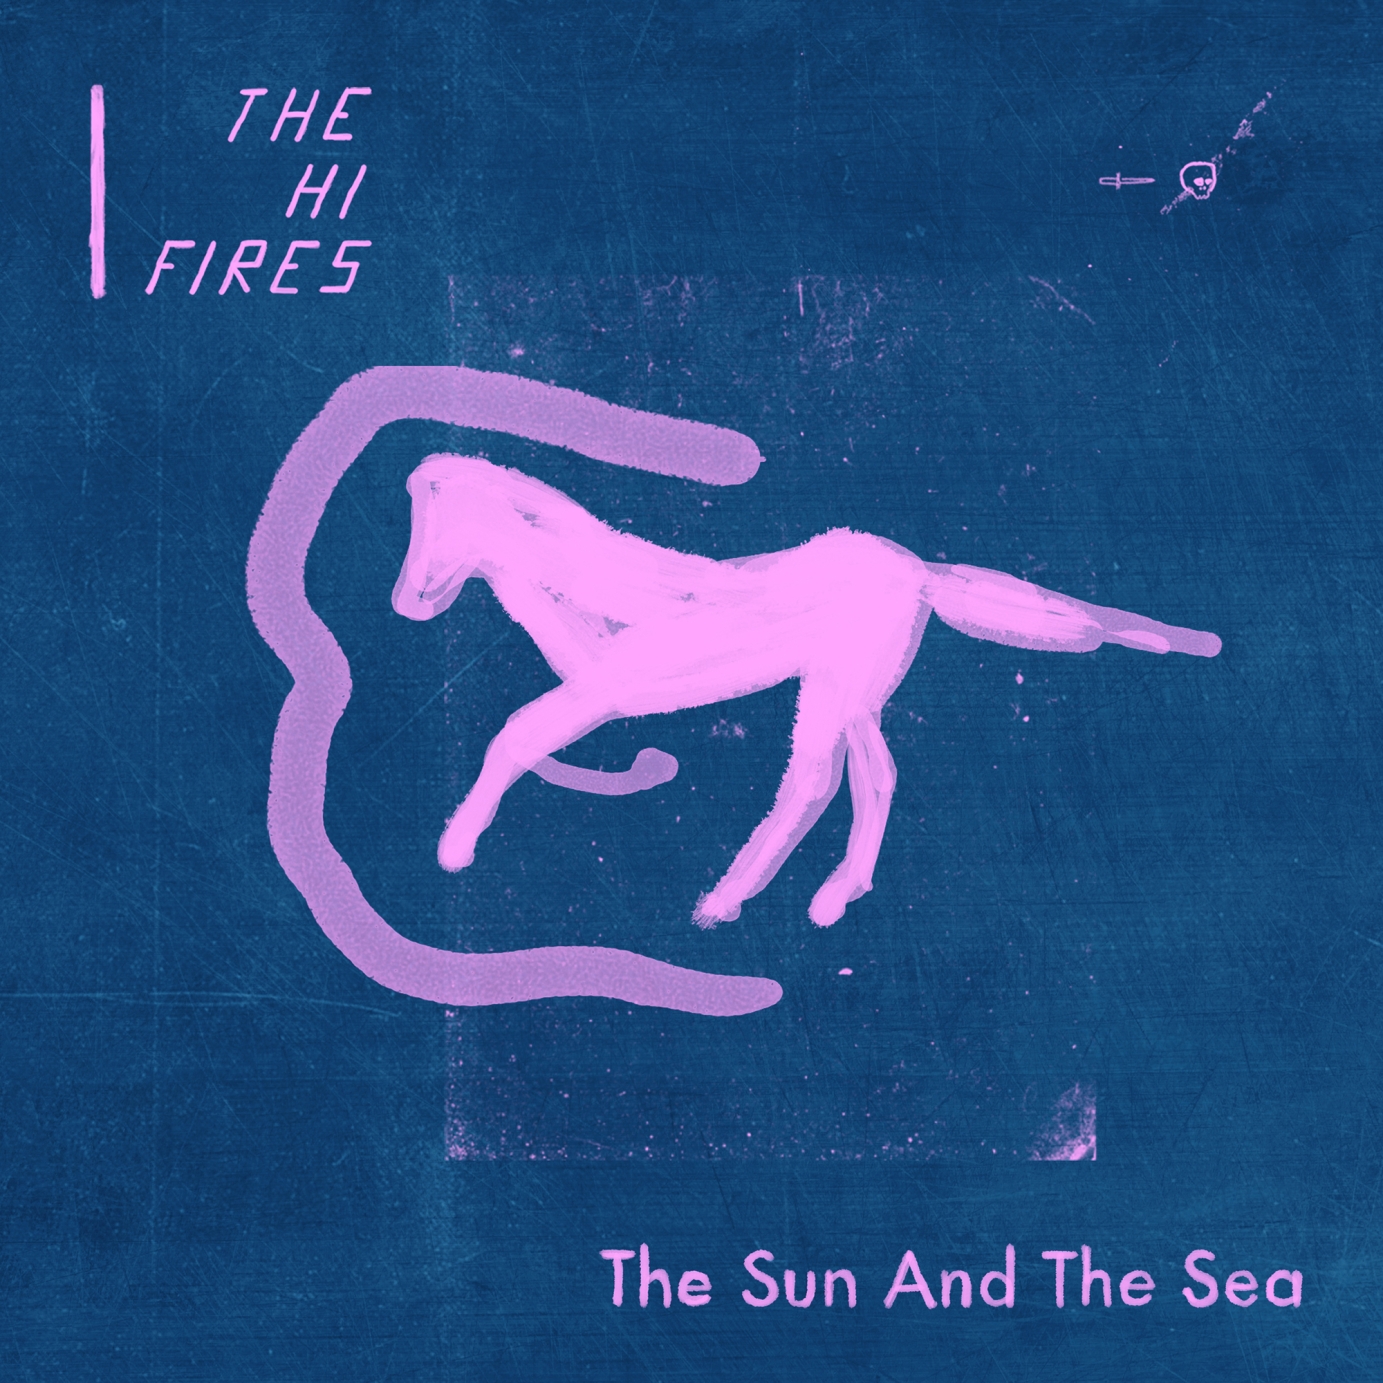 The-Hi-Fires-cover-The-Sun-And-The-Sea.jpg